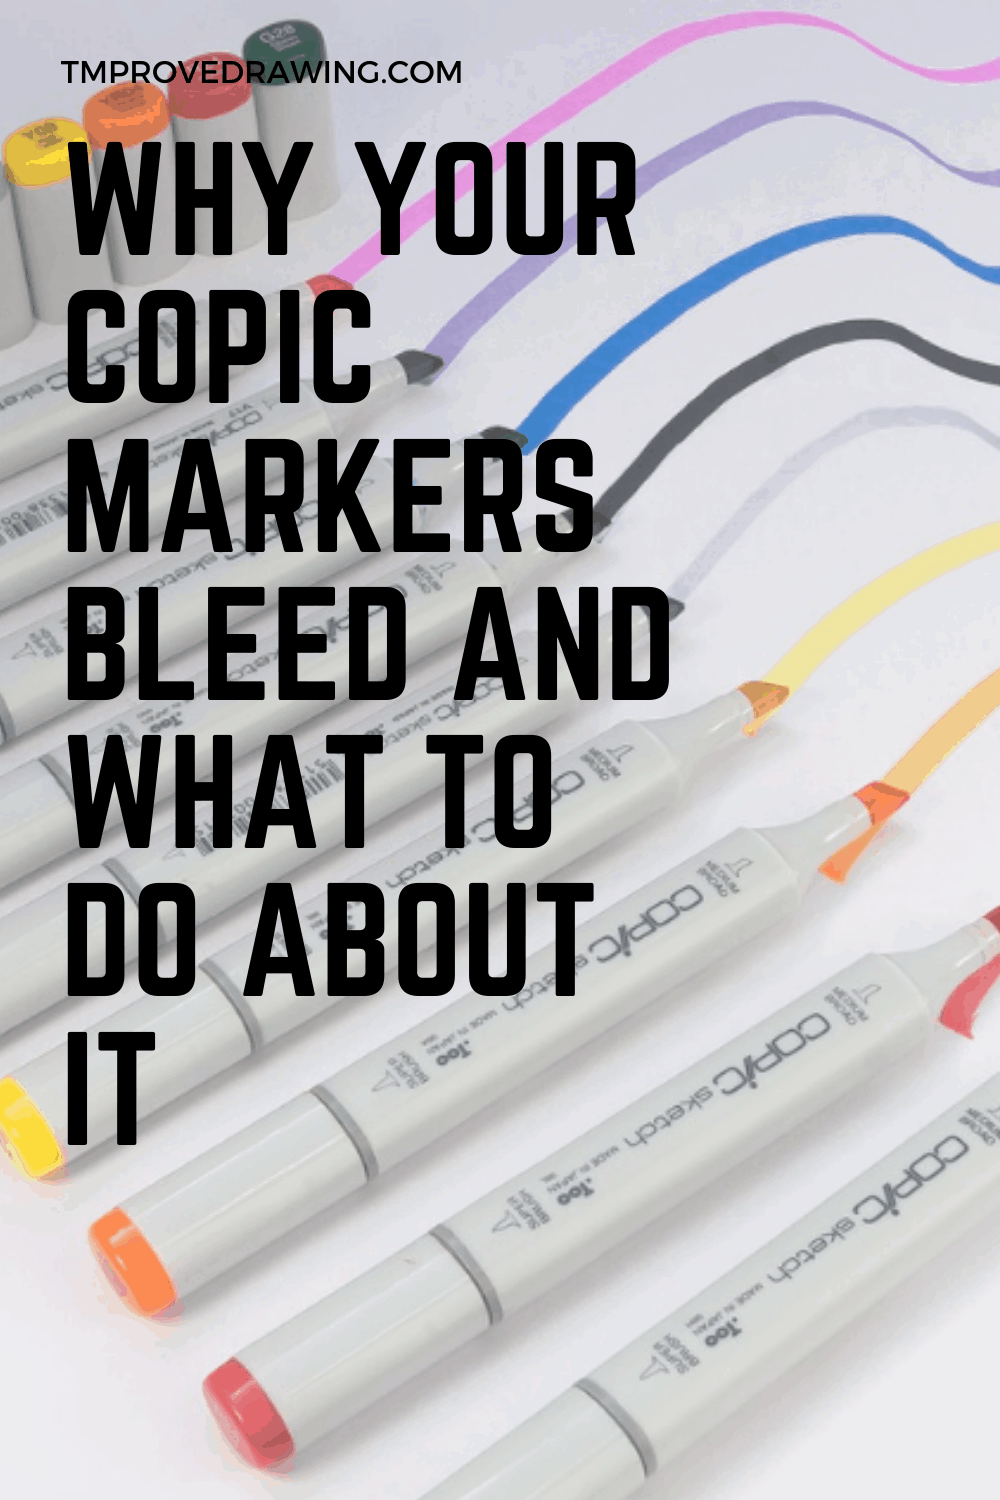 Download Why Your Copic Markers Bleed and What to Do About It ...